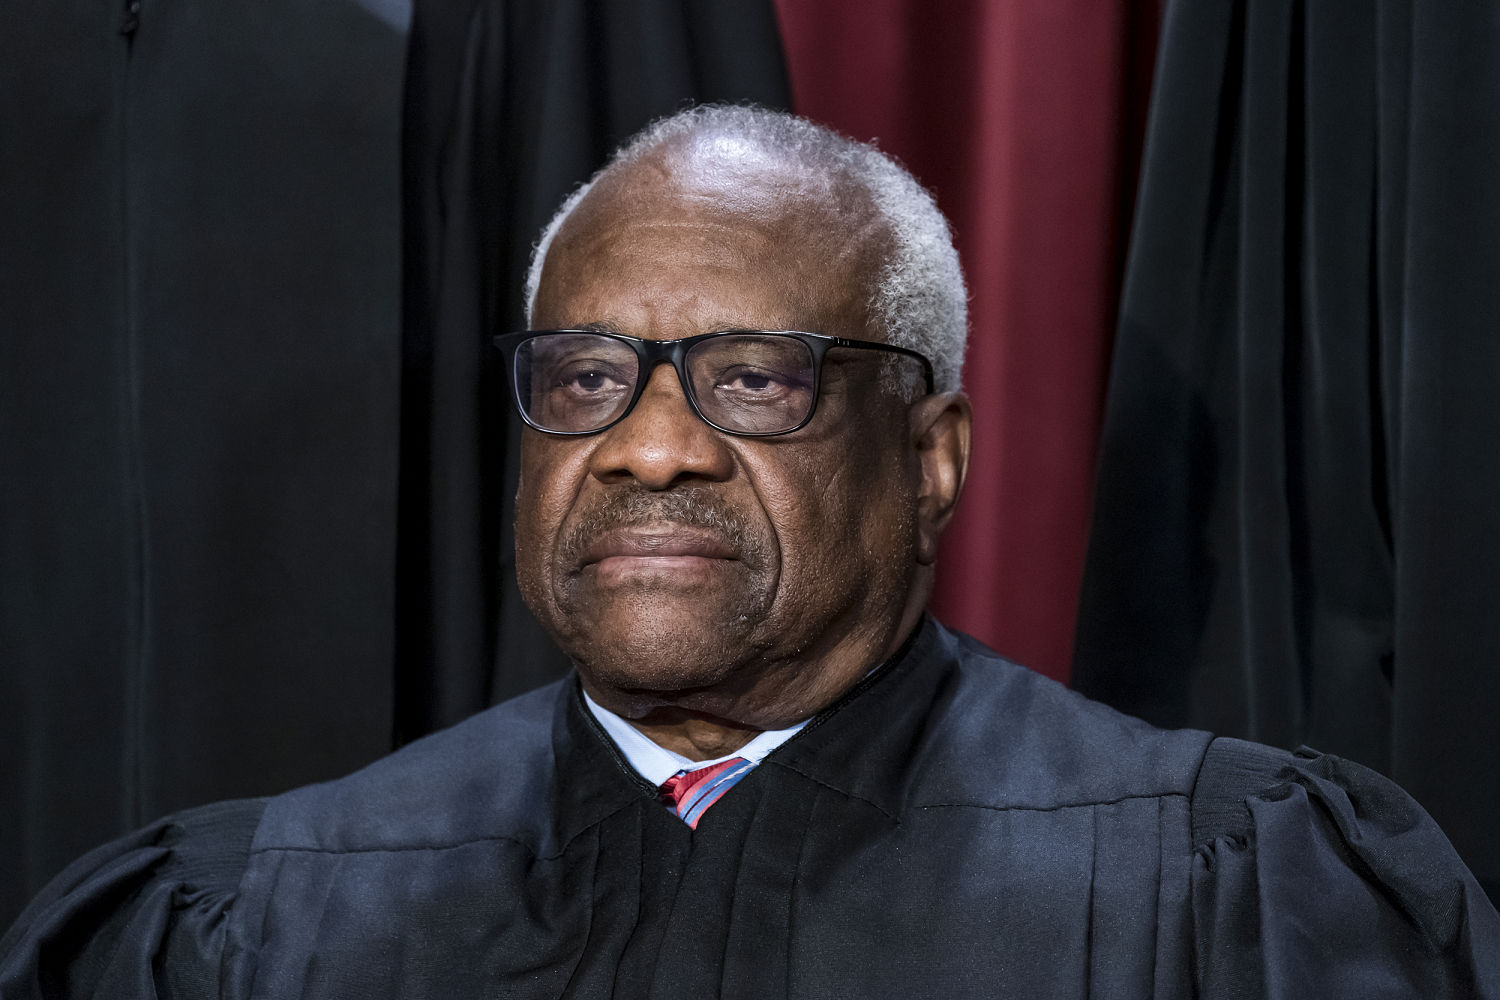 Clarence Thomas says critics are pushing ‘nastiness’ and calls Washington a ‘hideous place’